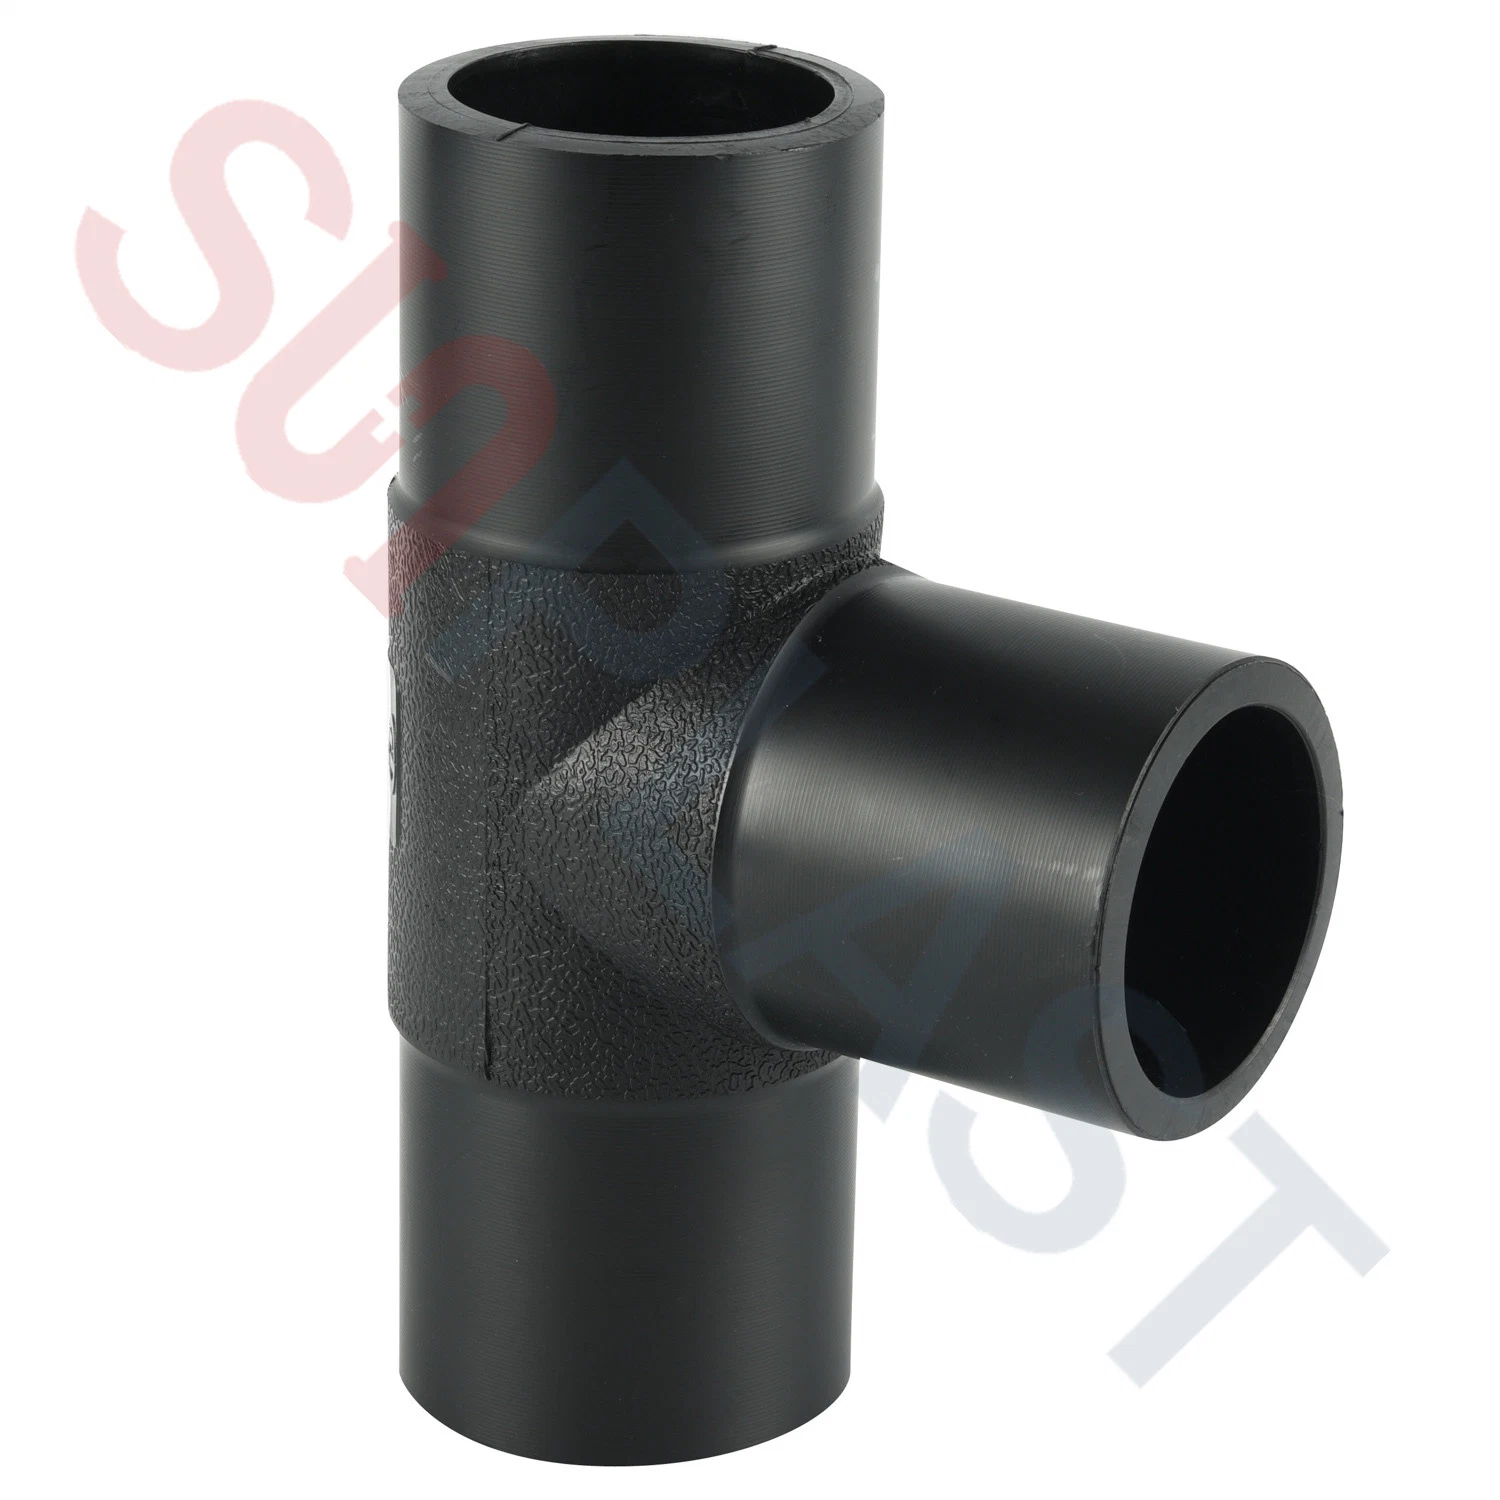 Poly Tee Poly Pipe Tee Fittings Poly Pipe T Piece 50-800mm in SDR11 & SDR17